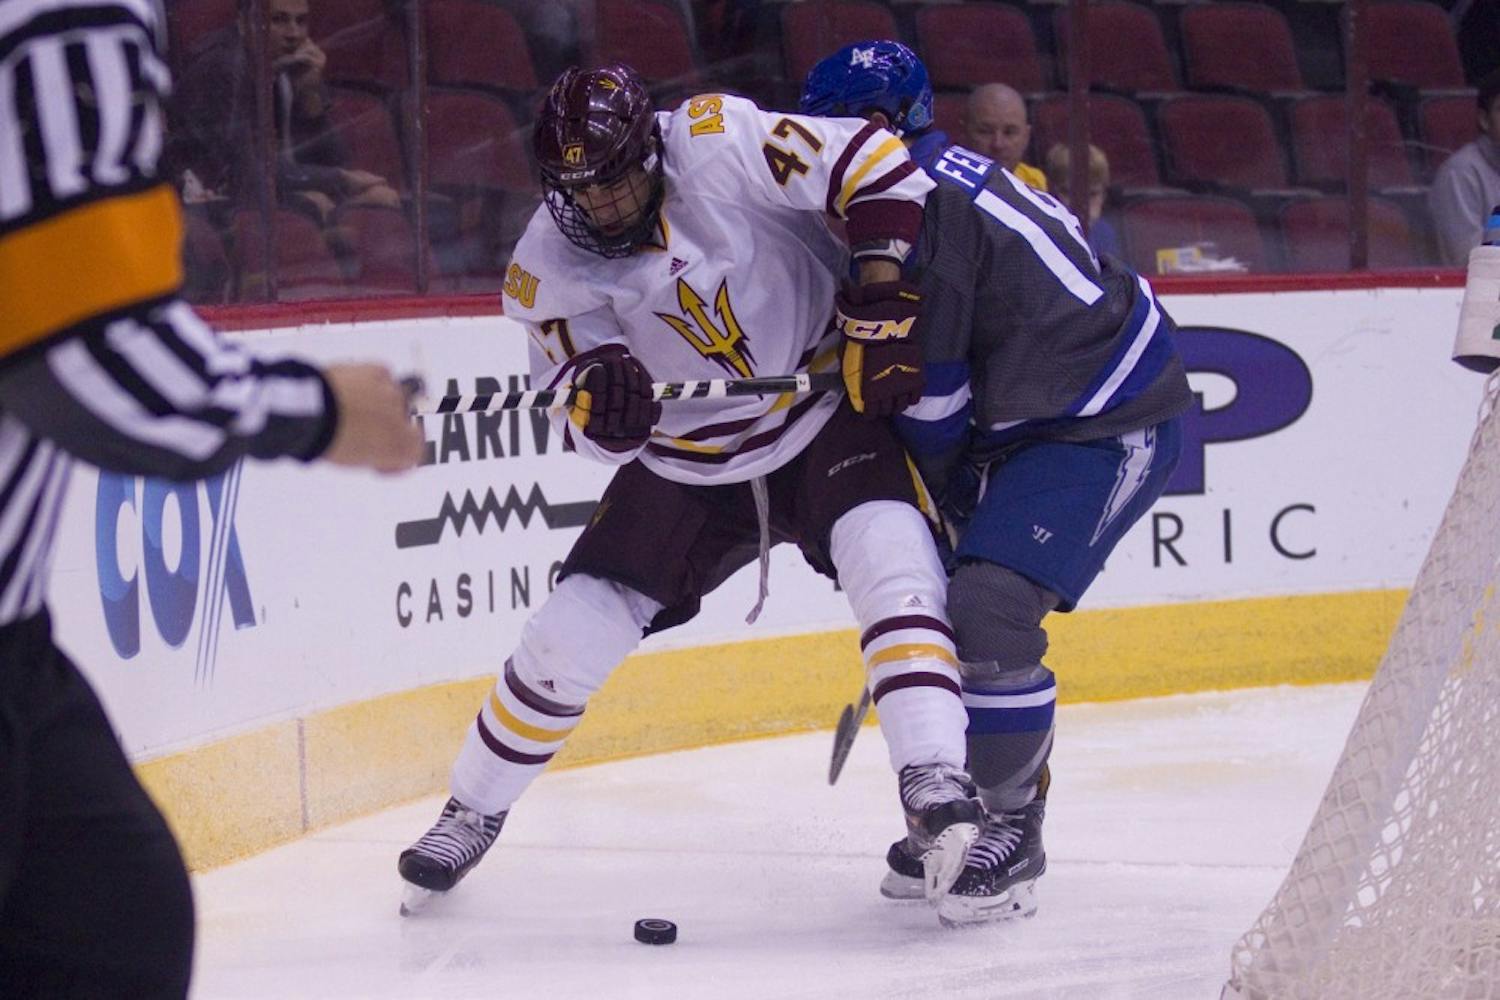 ASU sophomore right defender Nicholas Gushue (47) holds off an Air Force defenseman in a 5-2 victory against Air Force in Gila River Arena in Glendale, Arizona, on Sunday, Oct. 16, 2016.